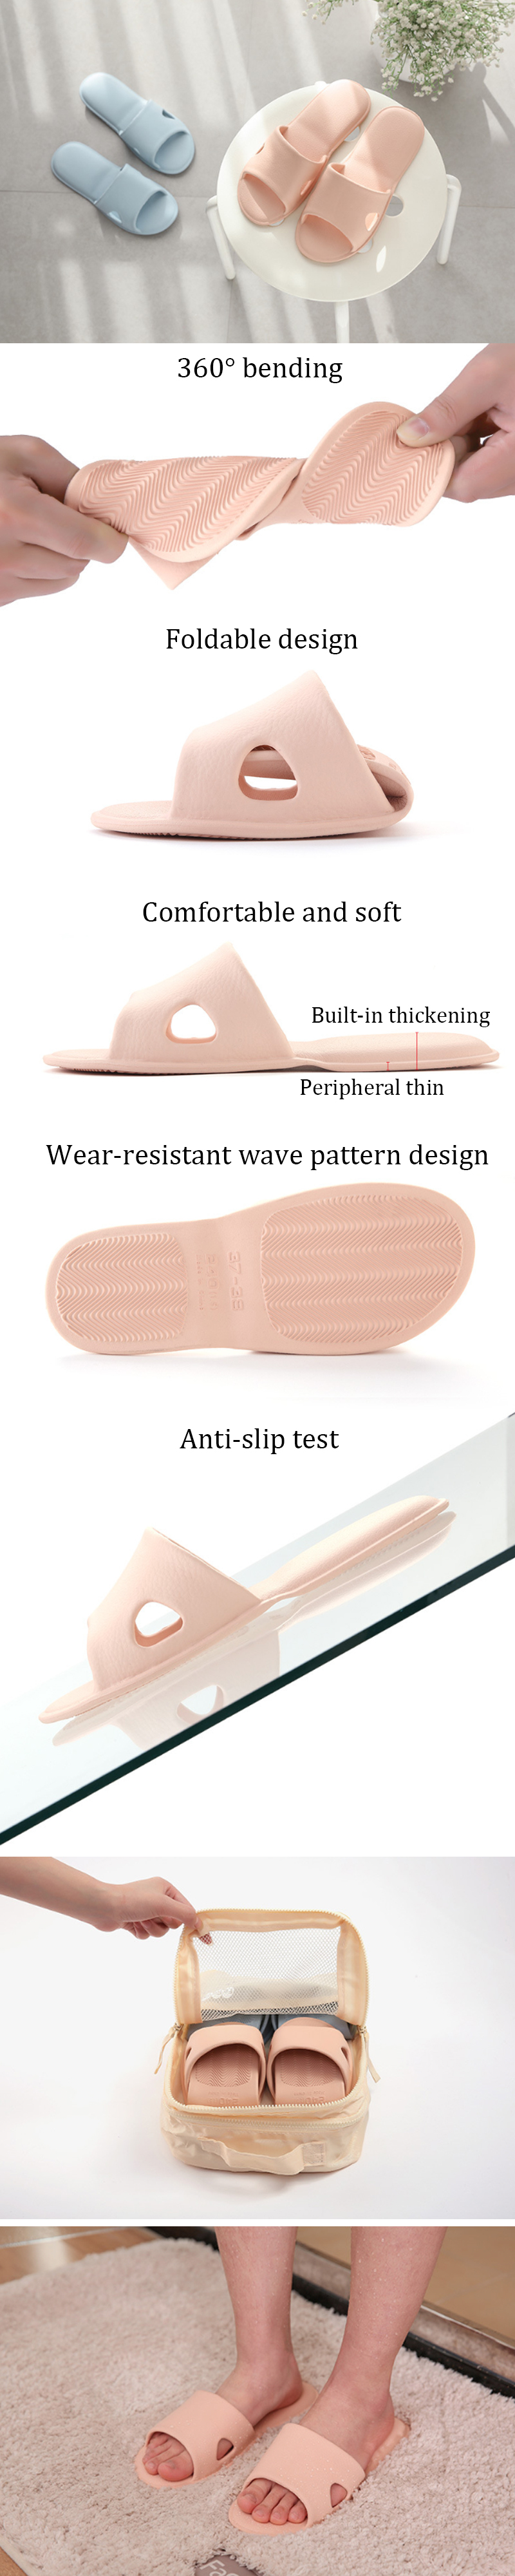 IPReereg-245265mm-Slippers-Outdoor-Travel-Portable-Flat-Bath-Slippers-Soft-Breathable-Non-slip-Shoes-1389402-1